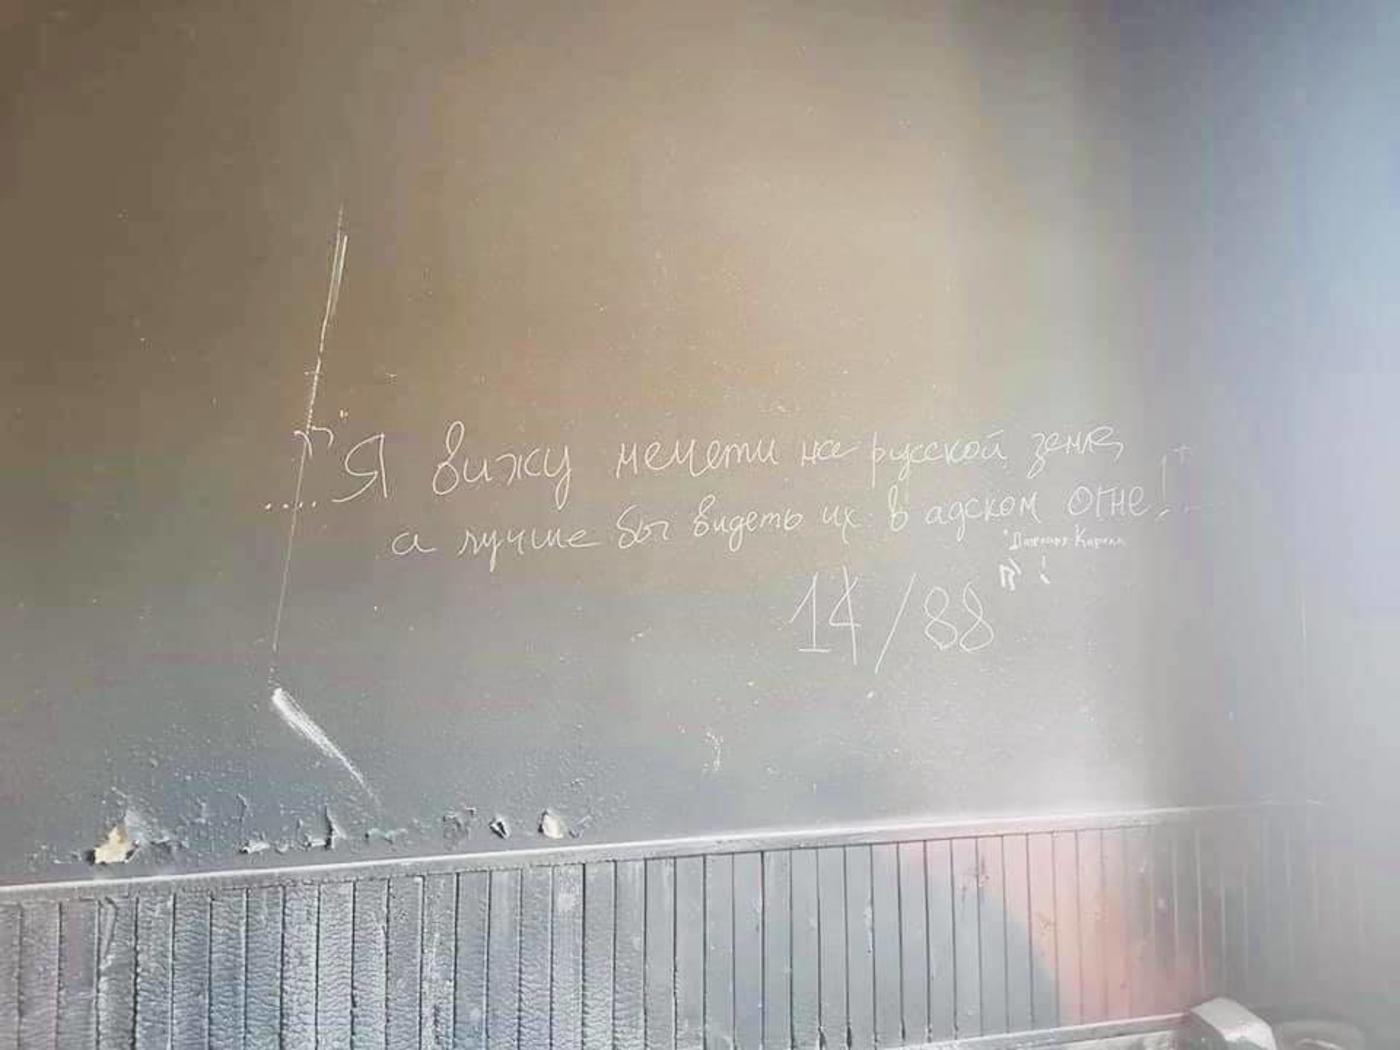 Russian graffiti reading “I see mosques on Russian soil, but I’d rather see them in hellfire” on the wall of an Ain Zara mosque, along with the 14/88 neo-Nazi tag (Social media)